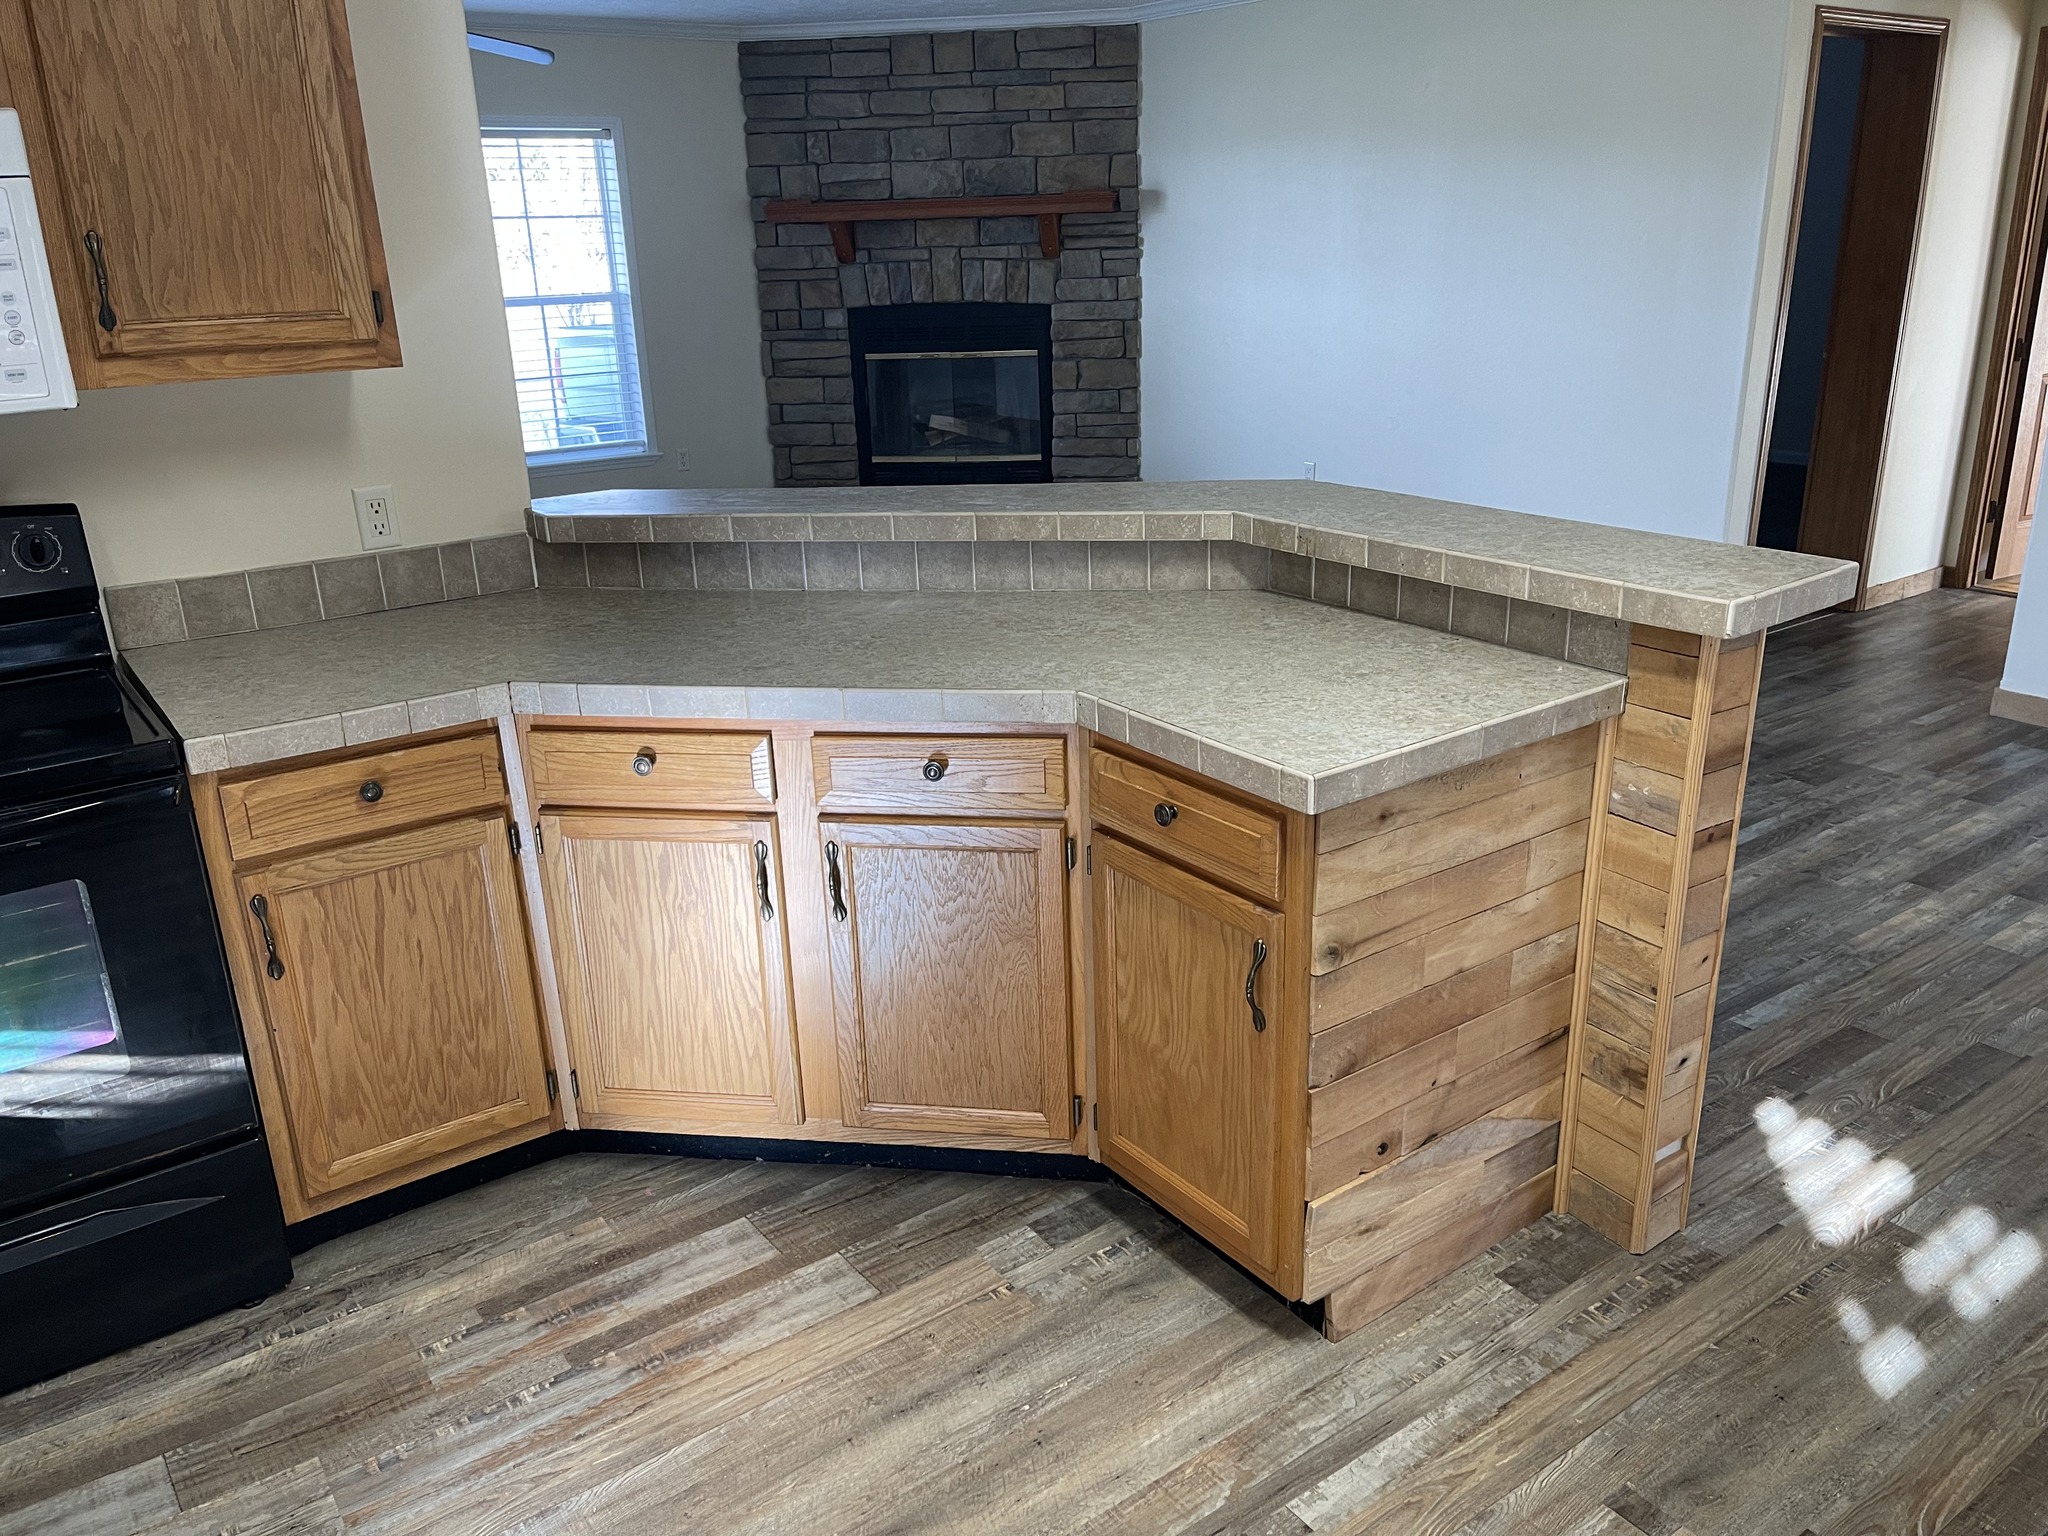 Kitchen & Bathroom Remodeling service in athens tennessee